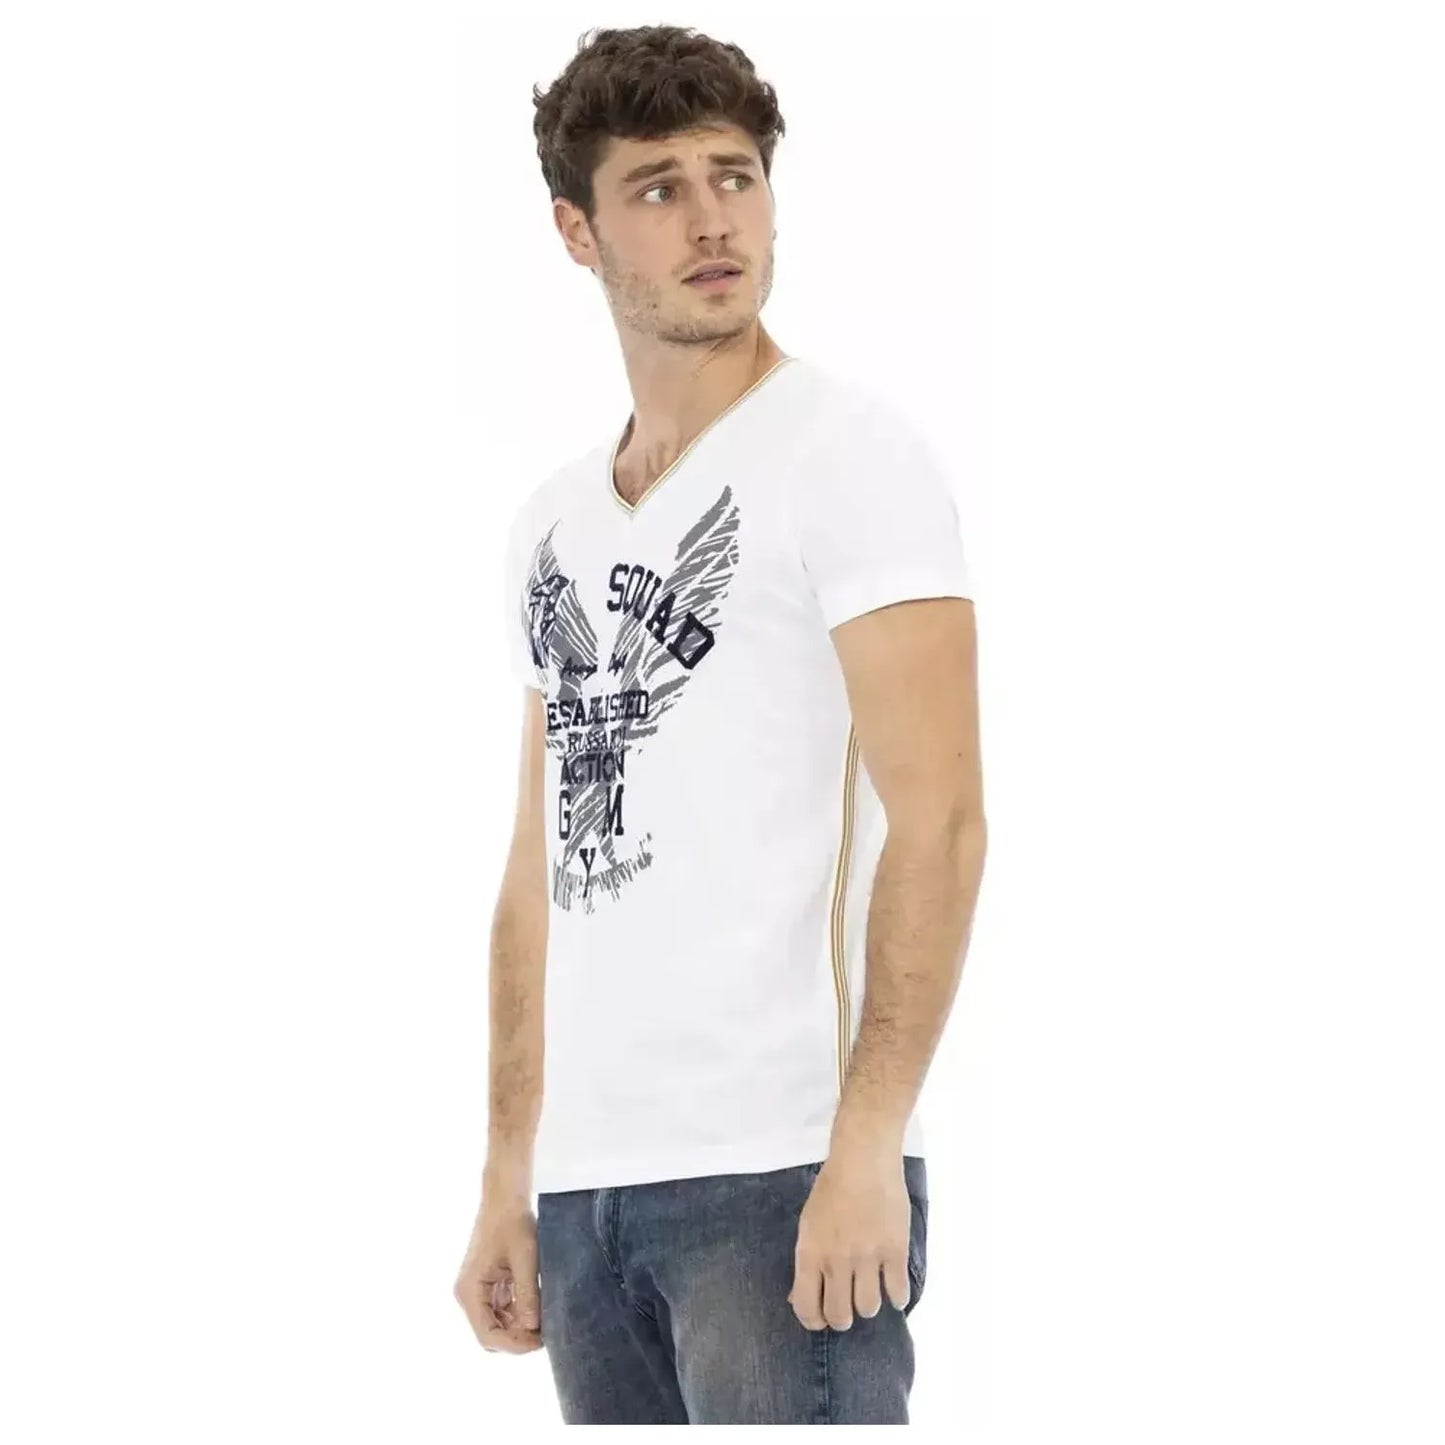 Trussardi Action Elevate Your Casual Style: Short Sleeve V-Neck Tee white-cotton-t-shirt-98